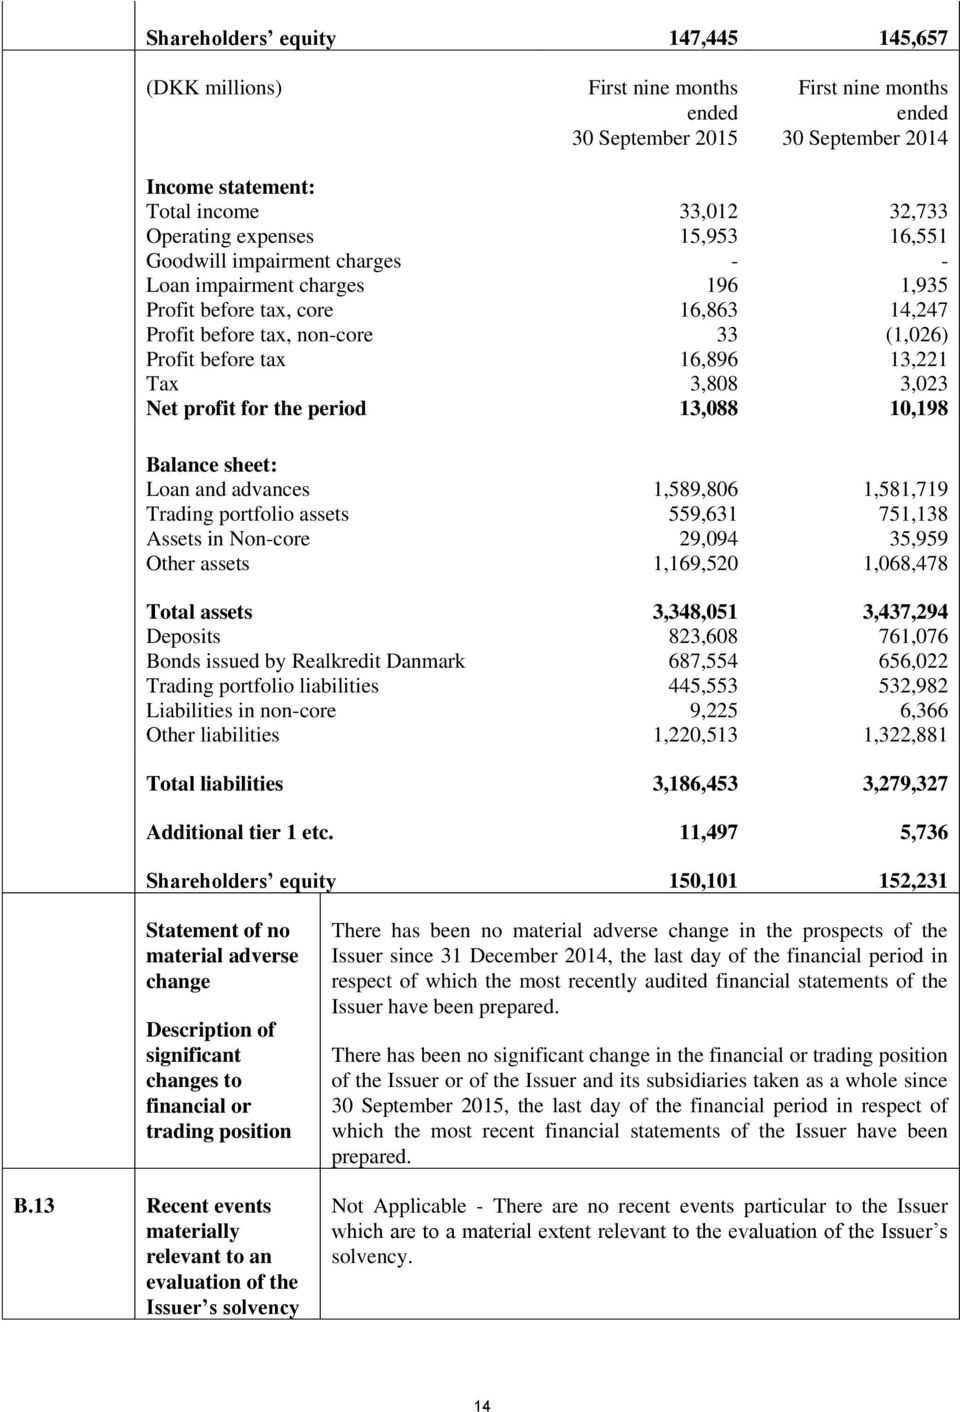 3,023 Net profit for the period 13,088 10,198 Balance sheet: Loan and advances 1,589,806 1,581,719 Trading portfolio assets 559,631 751,138 Assets in Non-core 29,094 35,959 Other assets 1,169,520